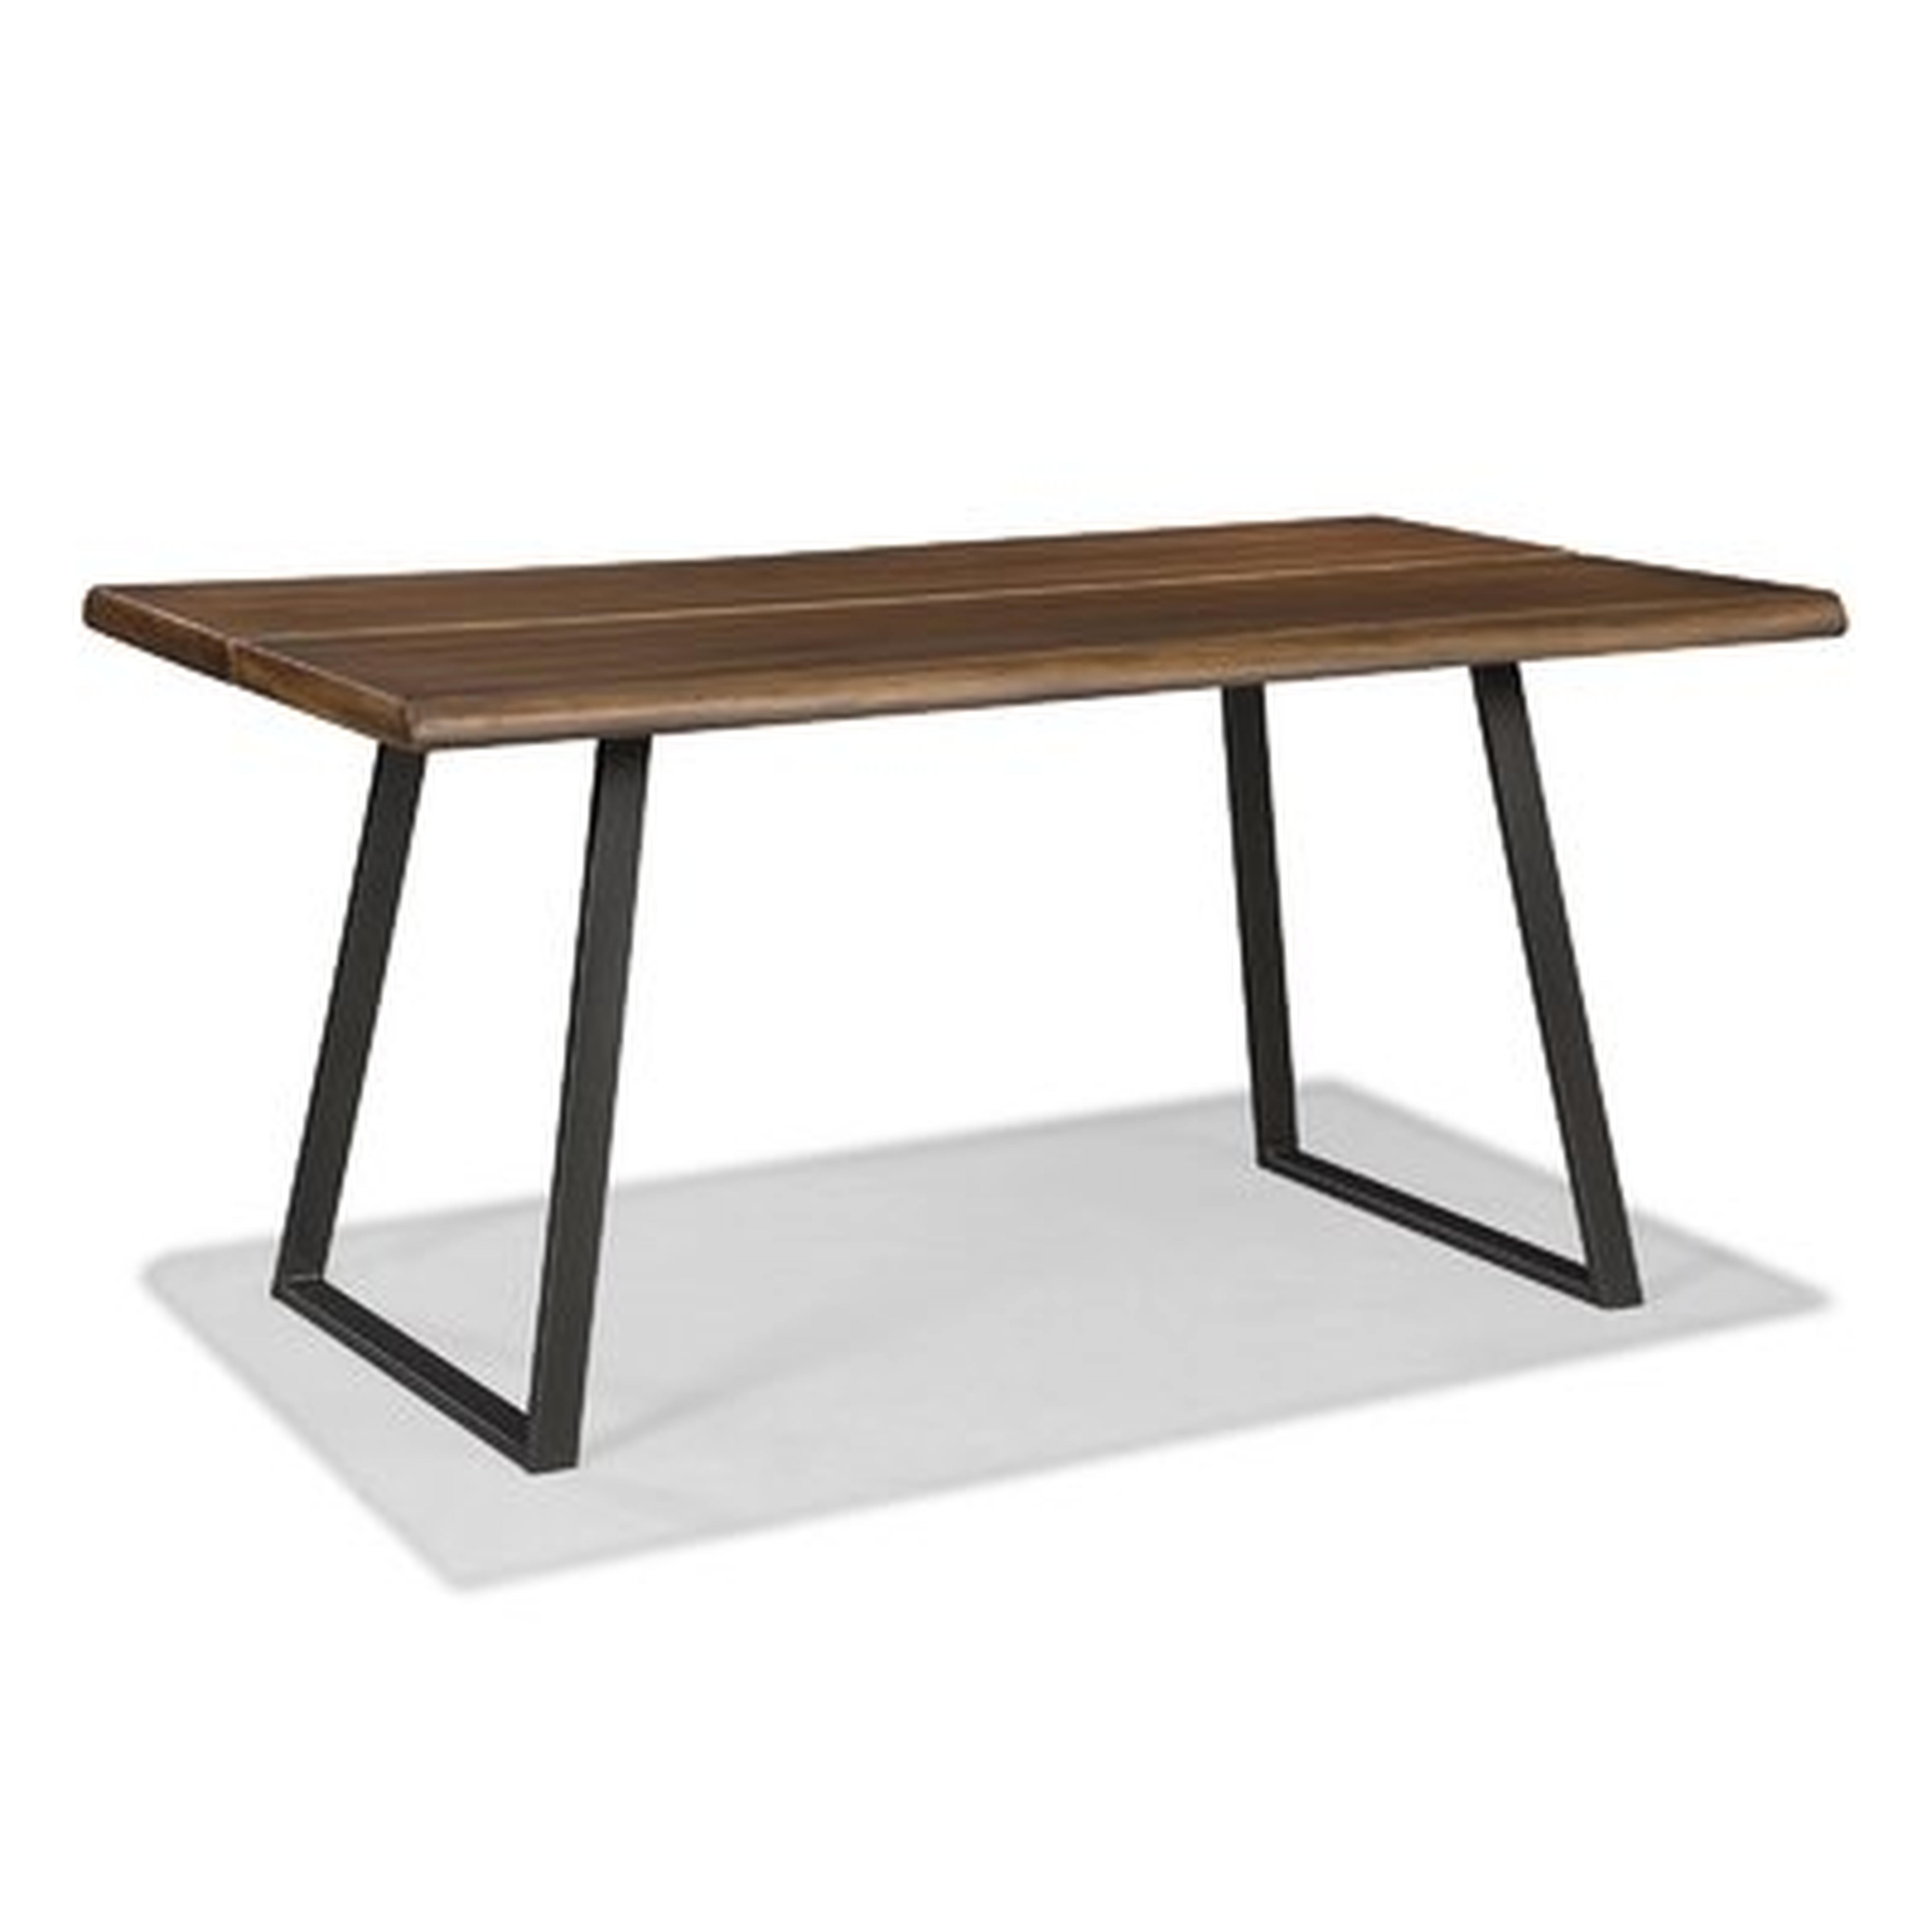 Live Edge Solid Wood Dining Table - AllModern